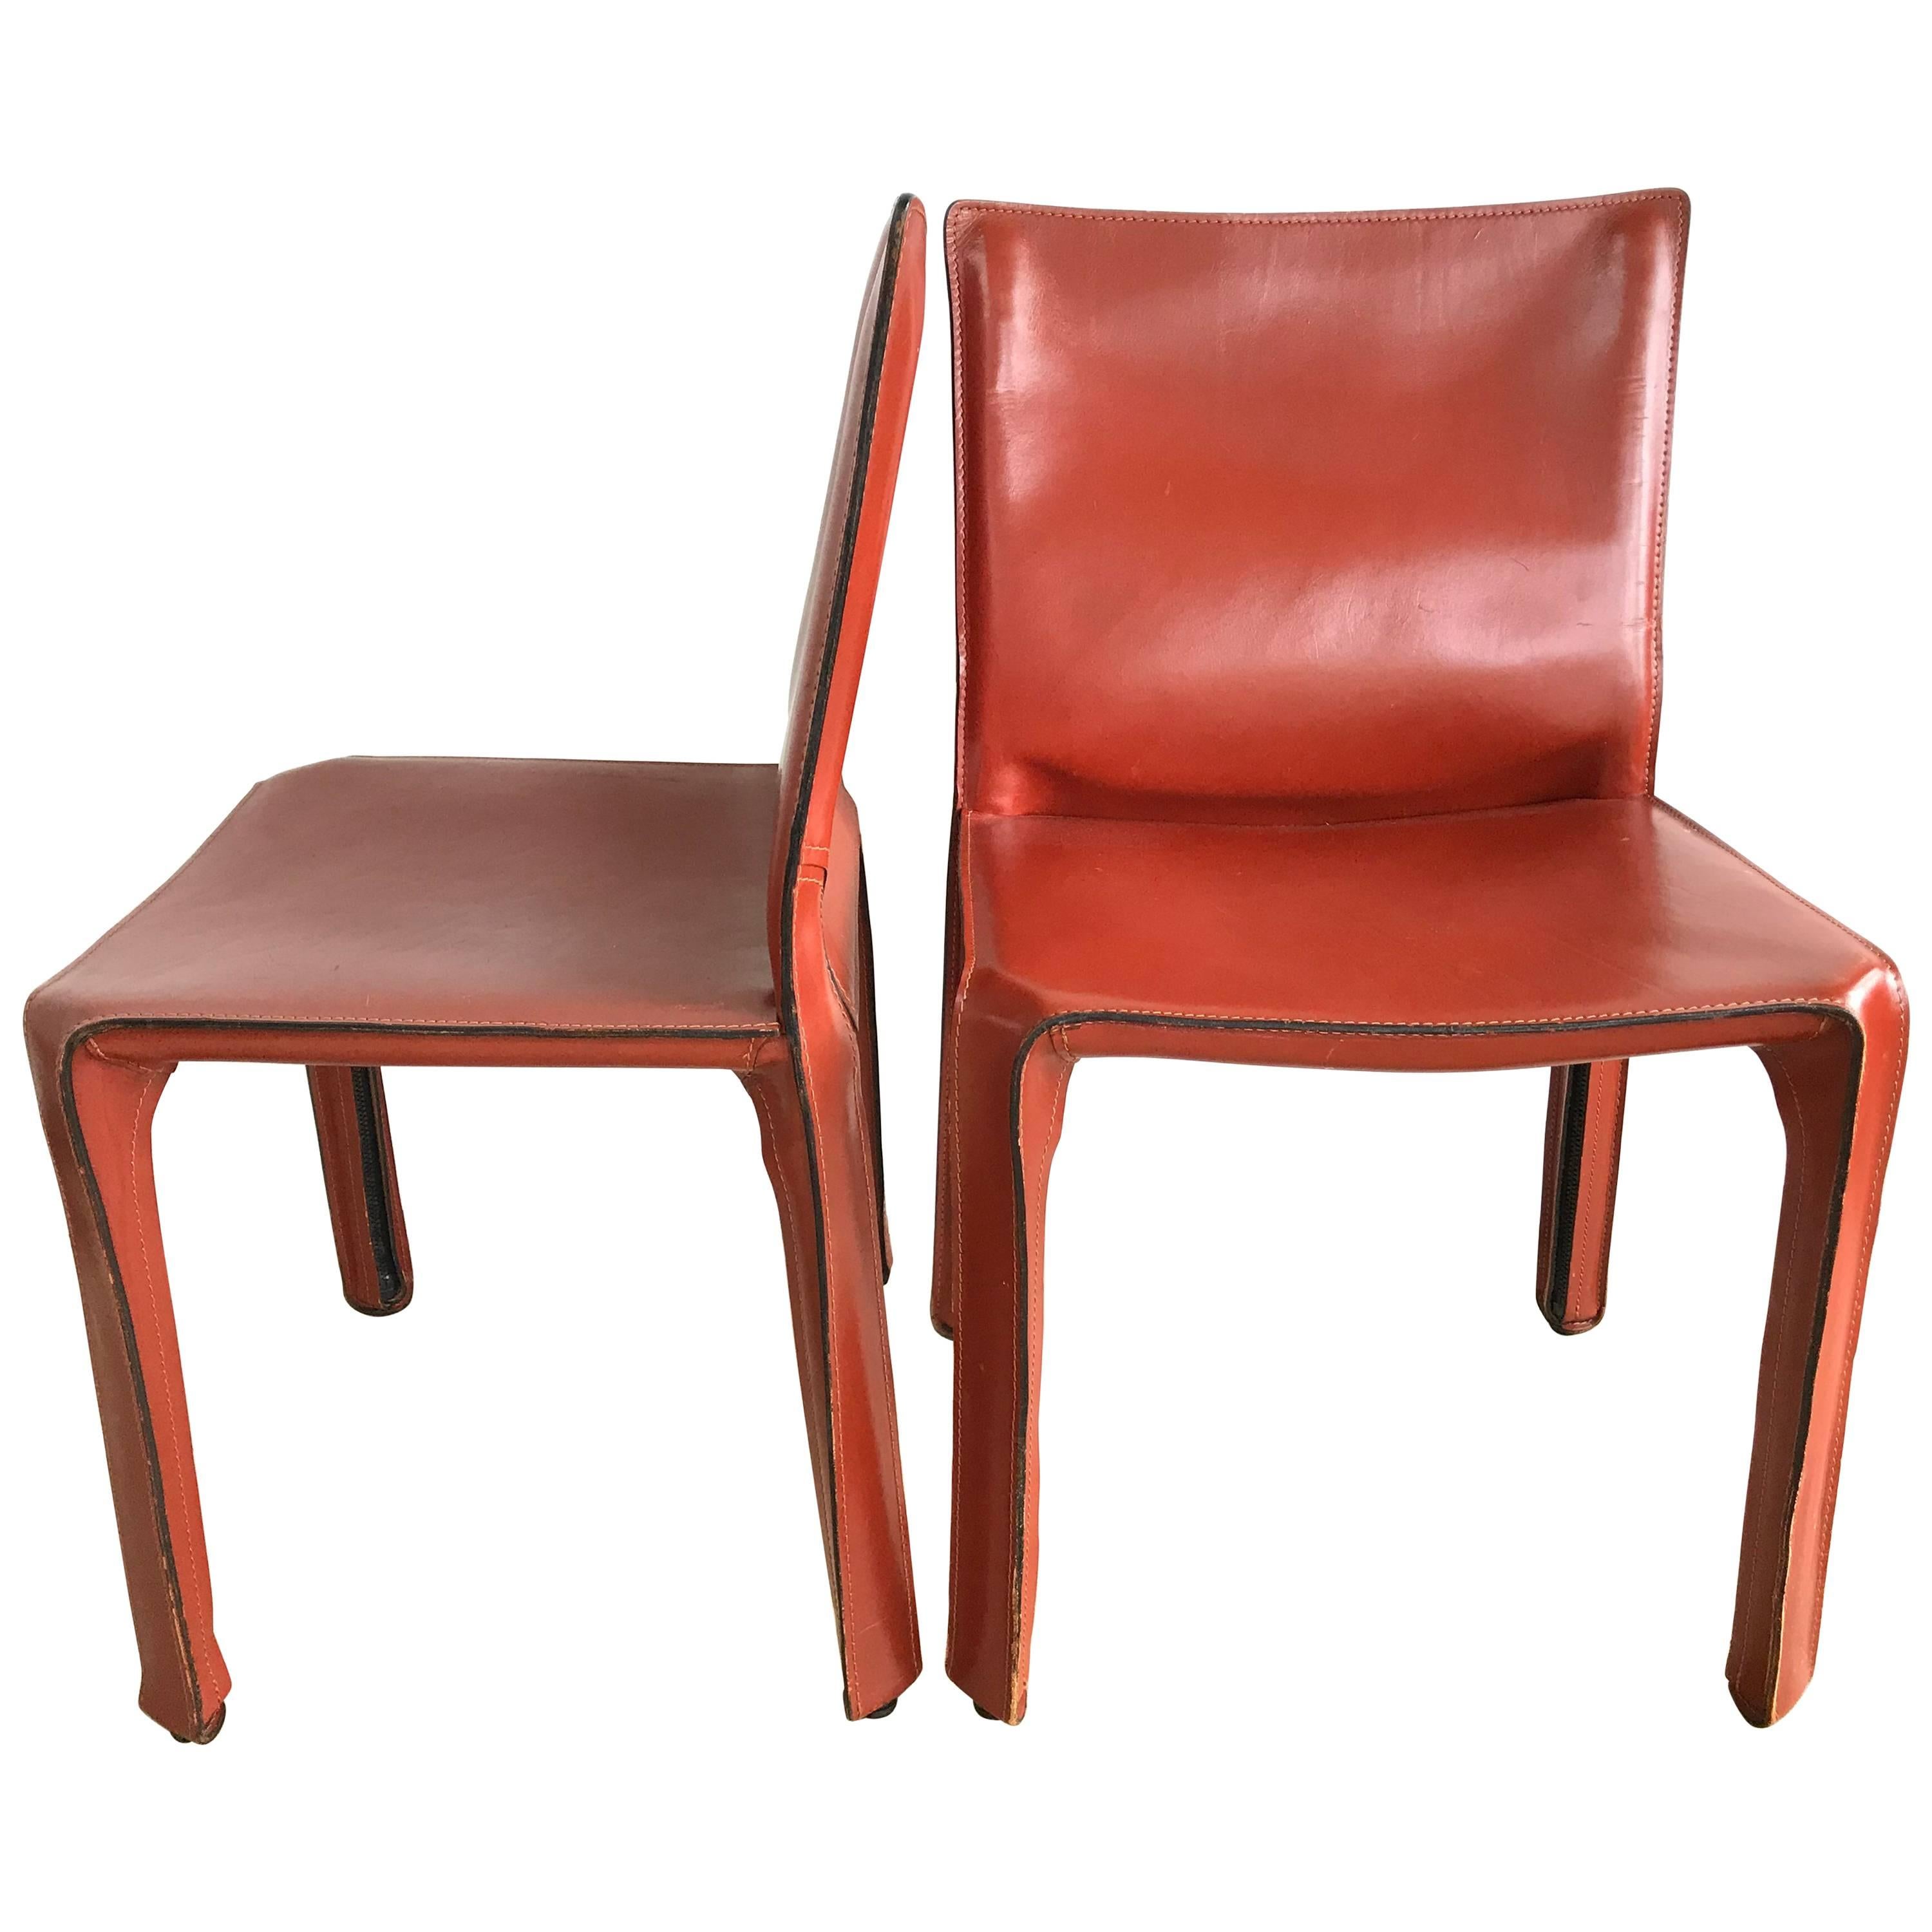 Pair of Mario Bellini “Cab” Dining Chairs for Cassina